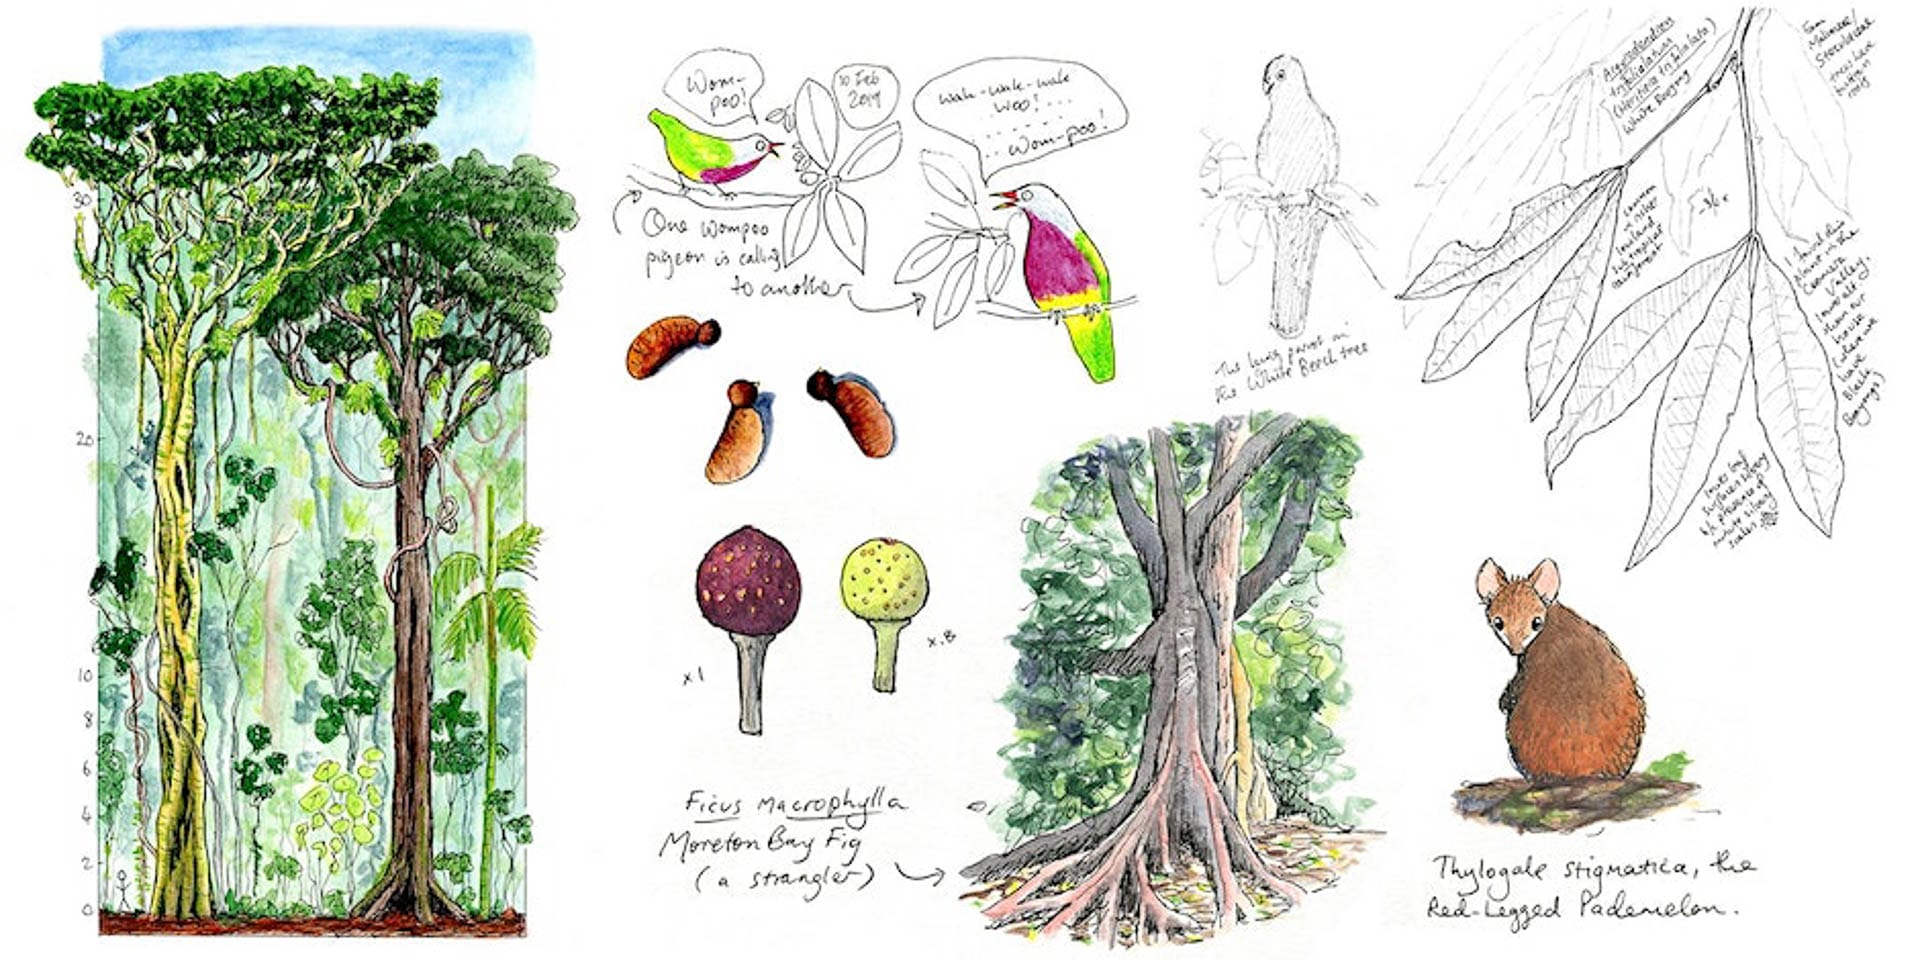 Rainforest Structure and Ecology: Nature Journaling Workshop, Dr Paula Peeters, events